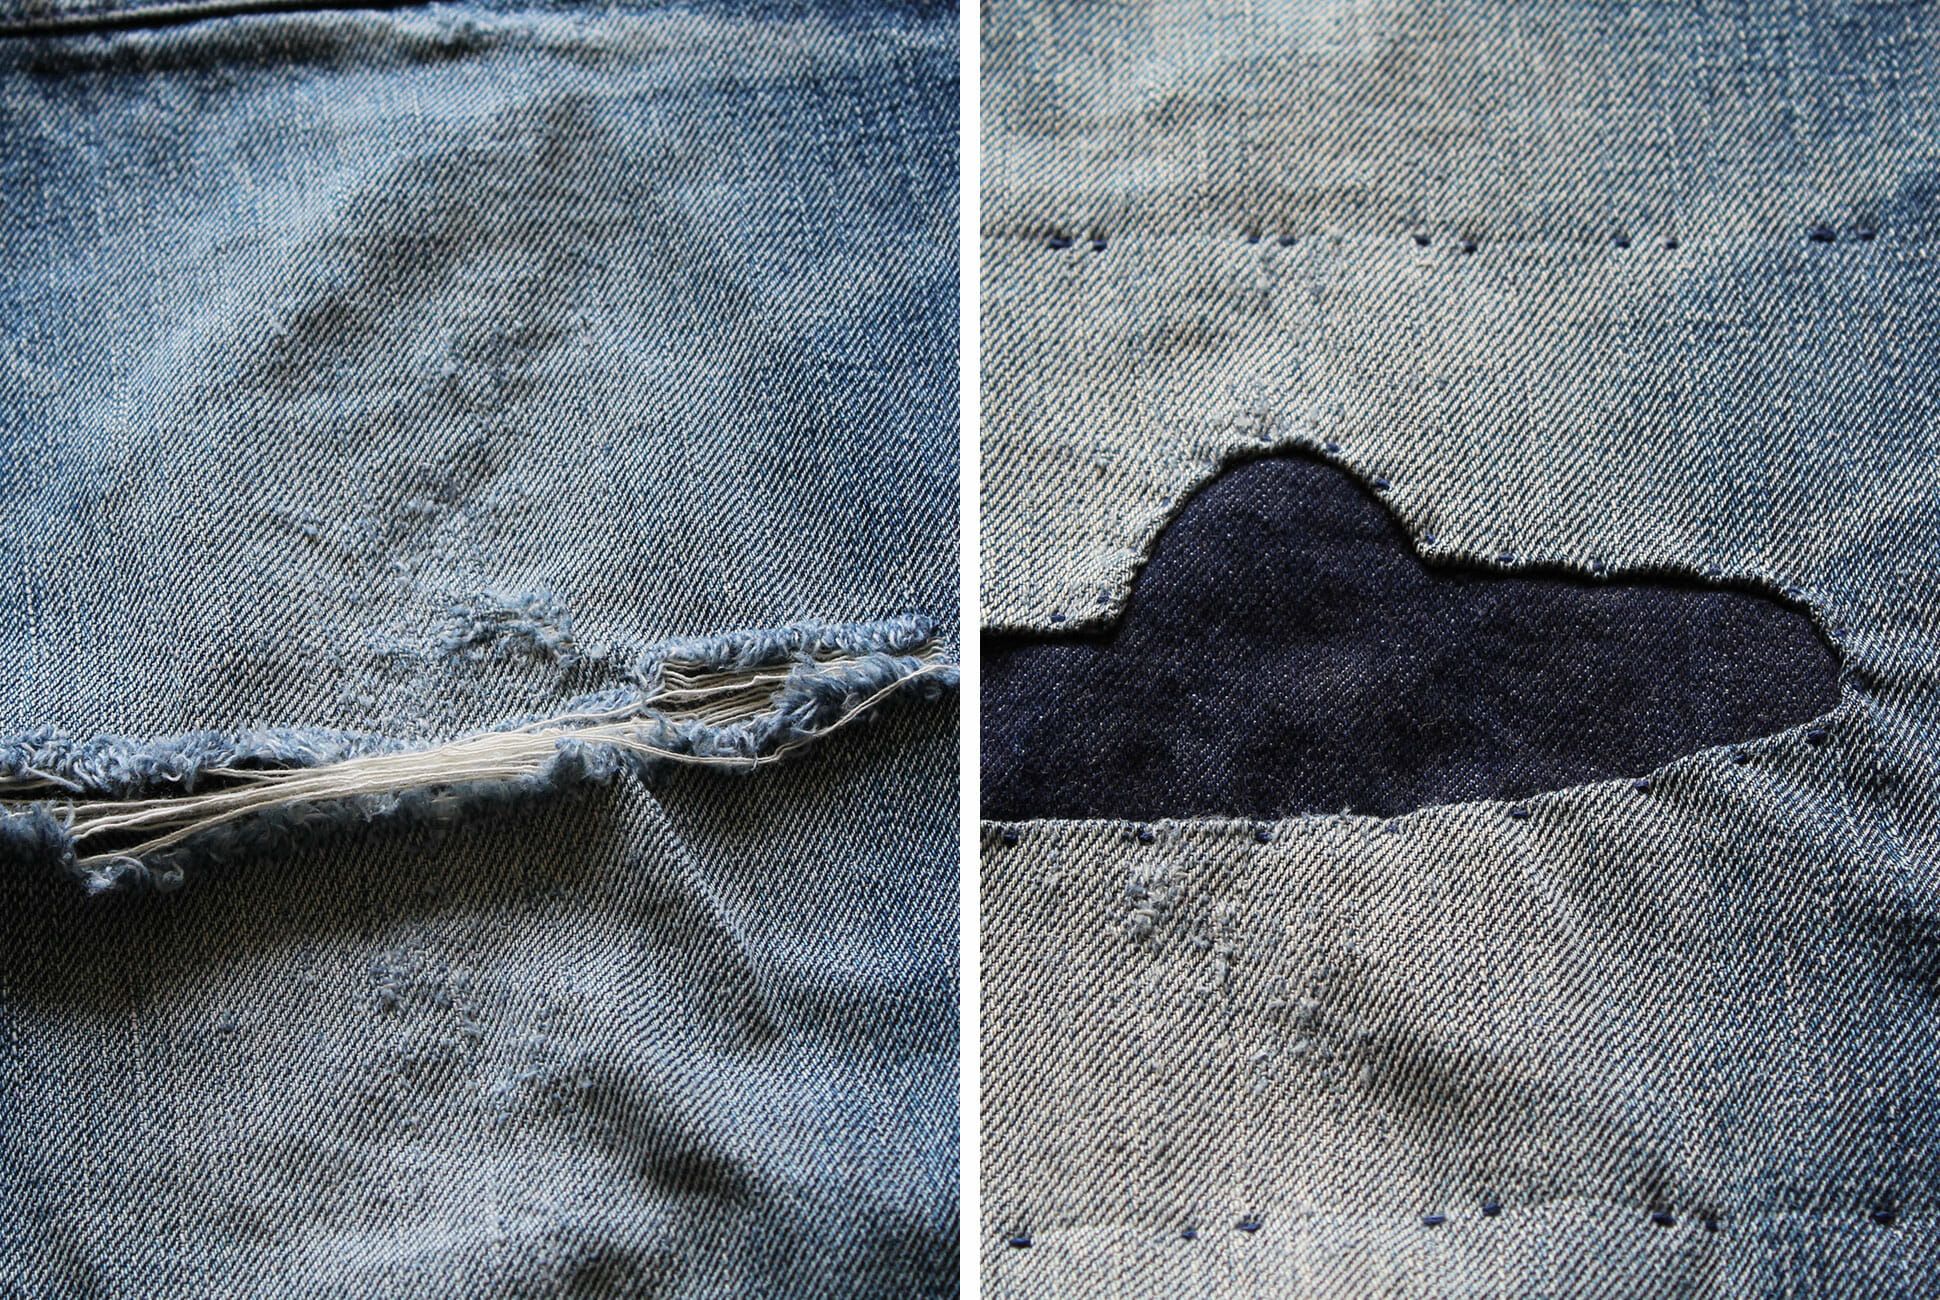 How To Patch Jeans  Best Ways For Patching Jeans